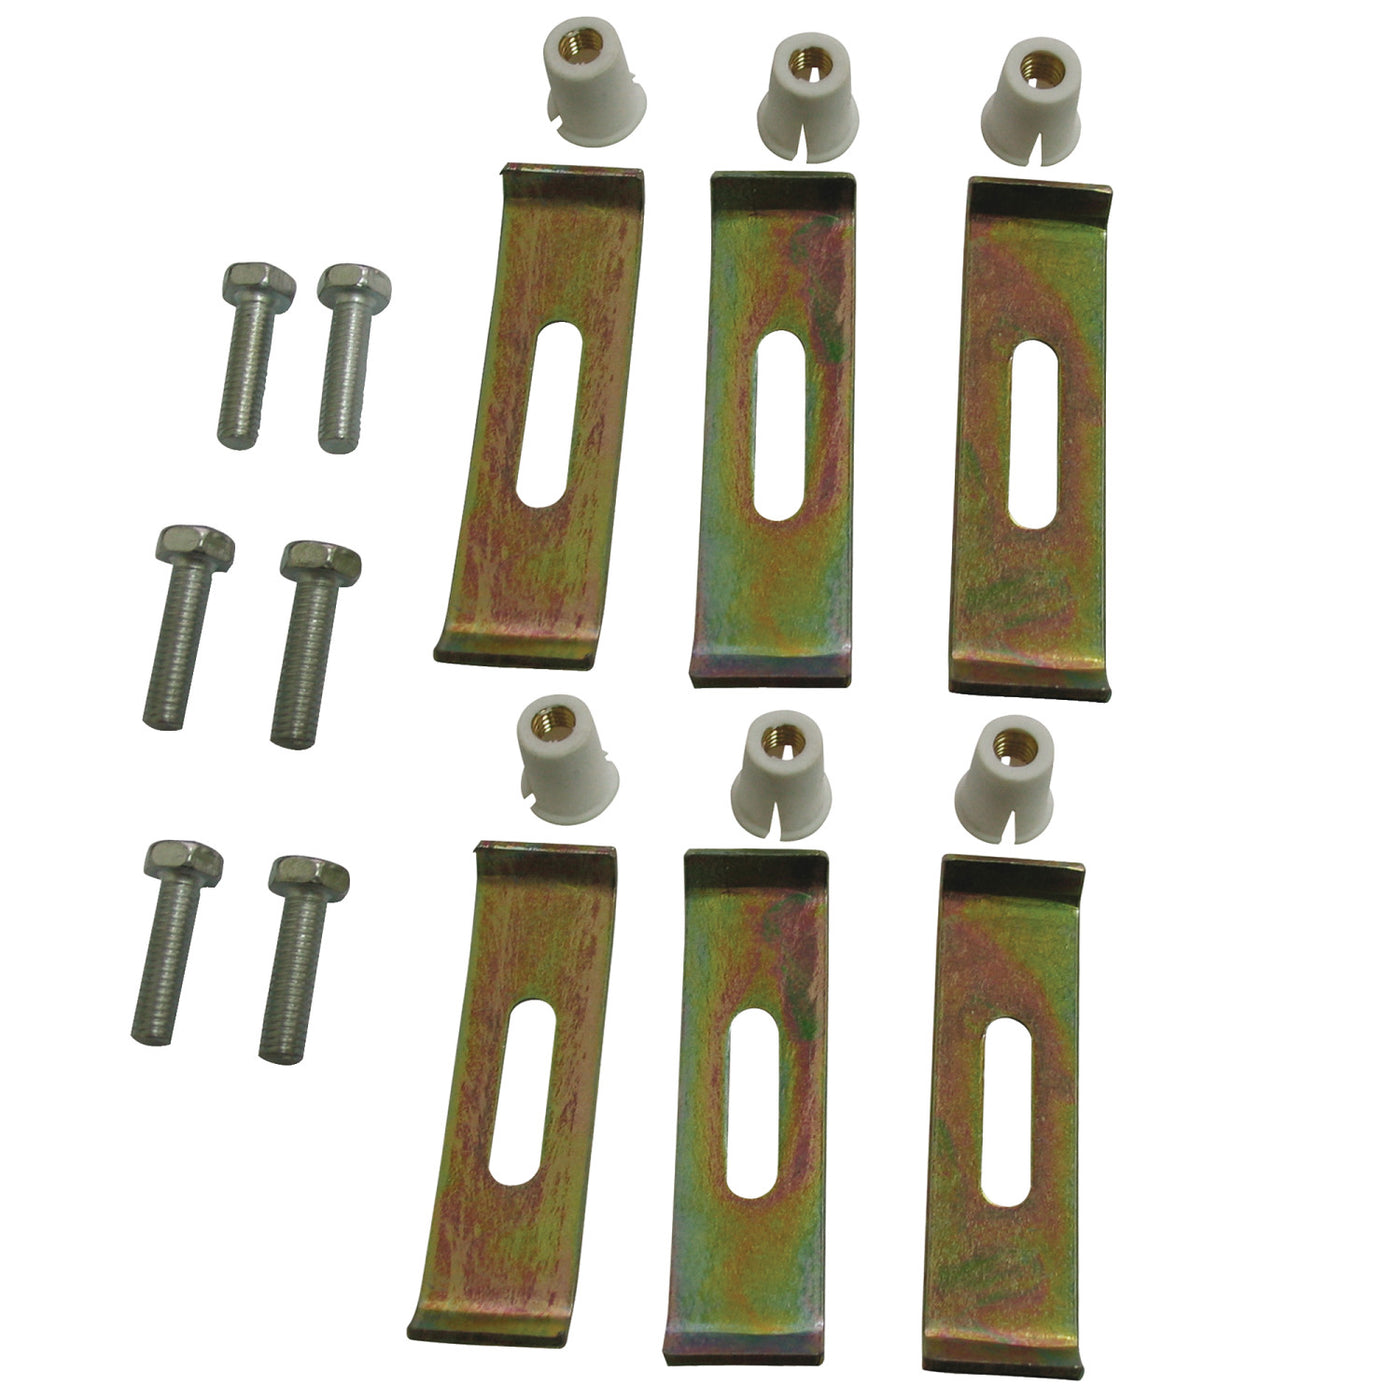 Elements of Design EUHDWR6 Undermount Clip 6 Clips Pack, Raw